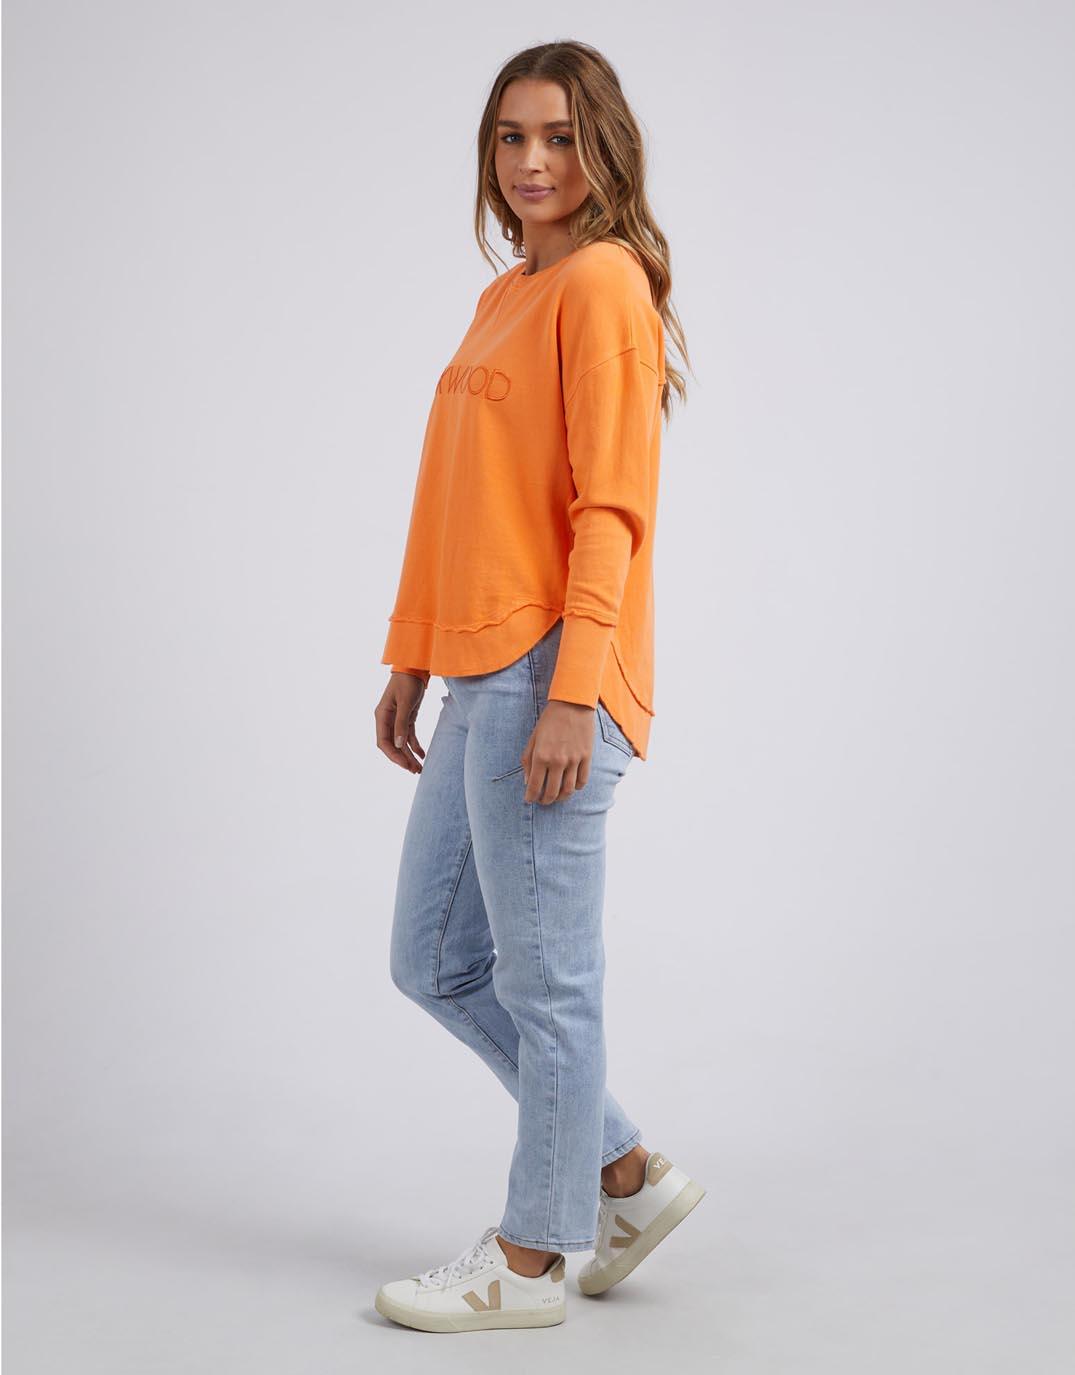 Foxwood - Simplified Crew - Orange - White & Co Living Jumpers